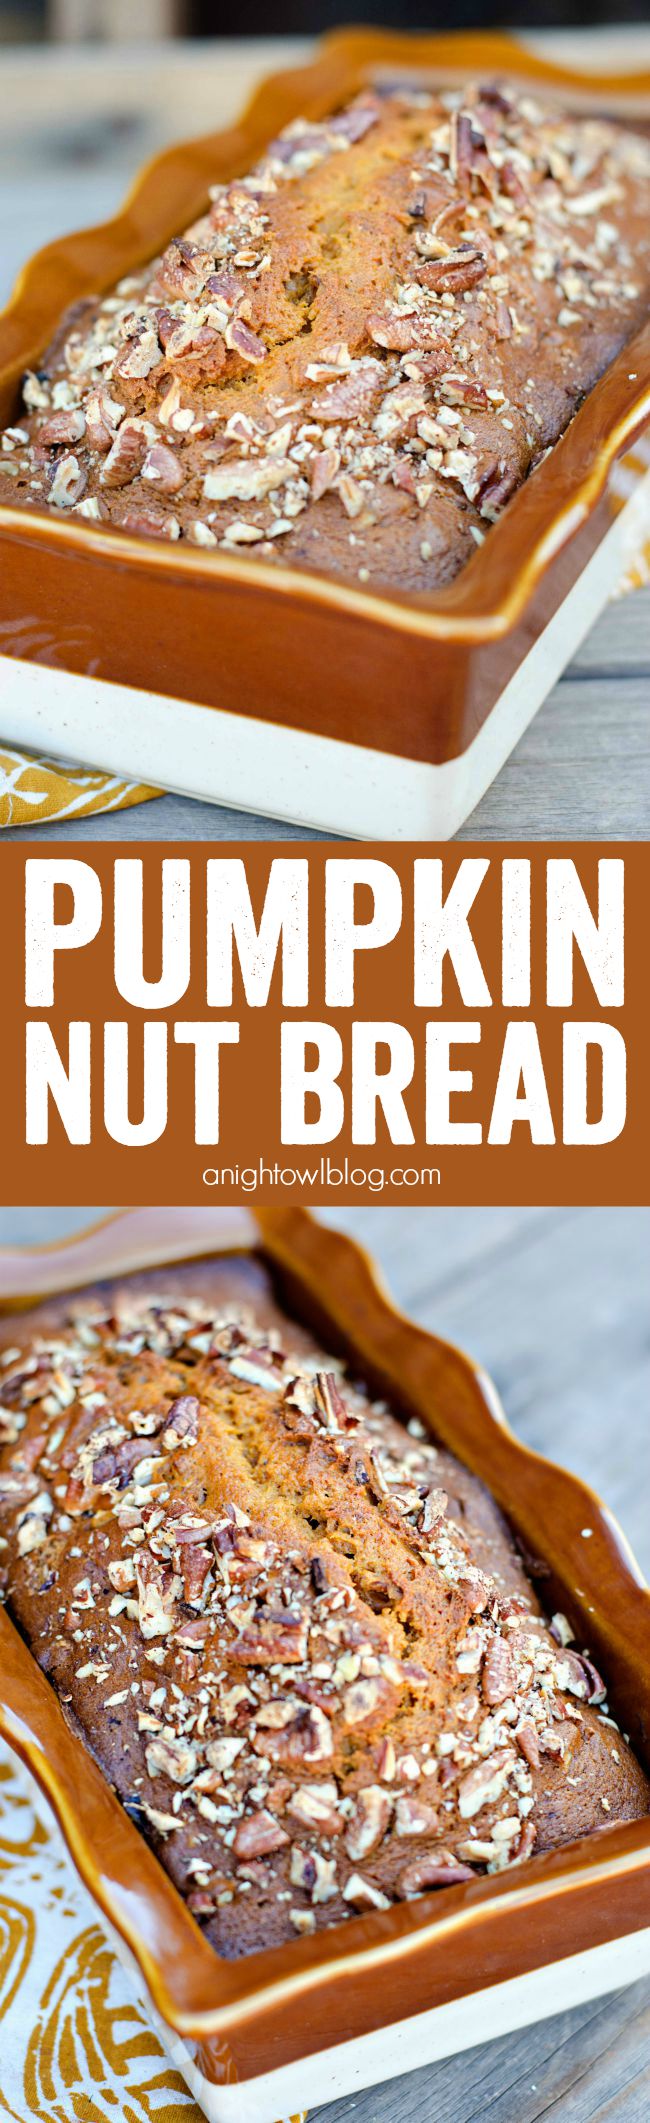 A seriously Easy Pumpkin Nut Bread recipe that you can whip up in ONE BOWL in just minutes! Your friends will be begging you for this recipe!